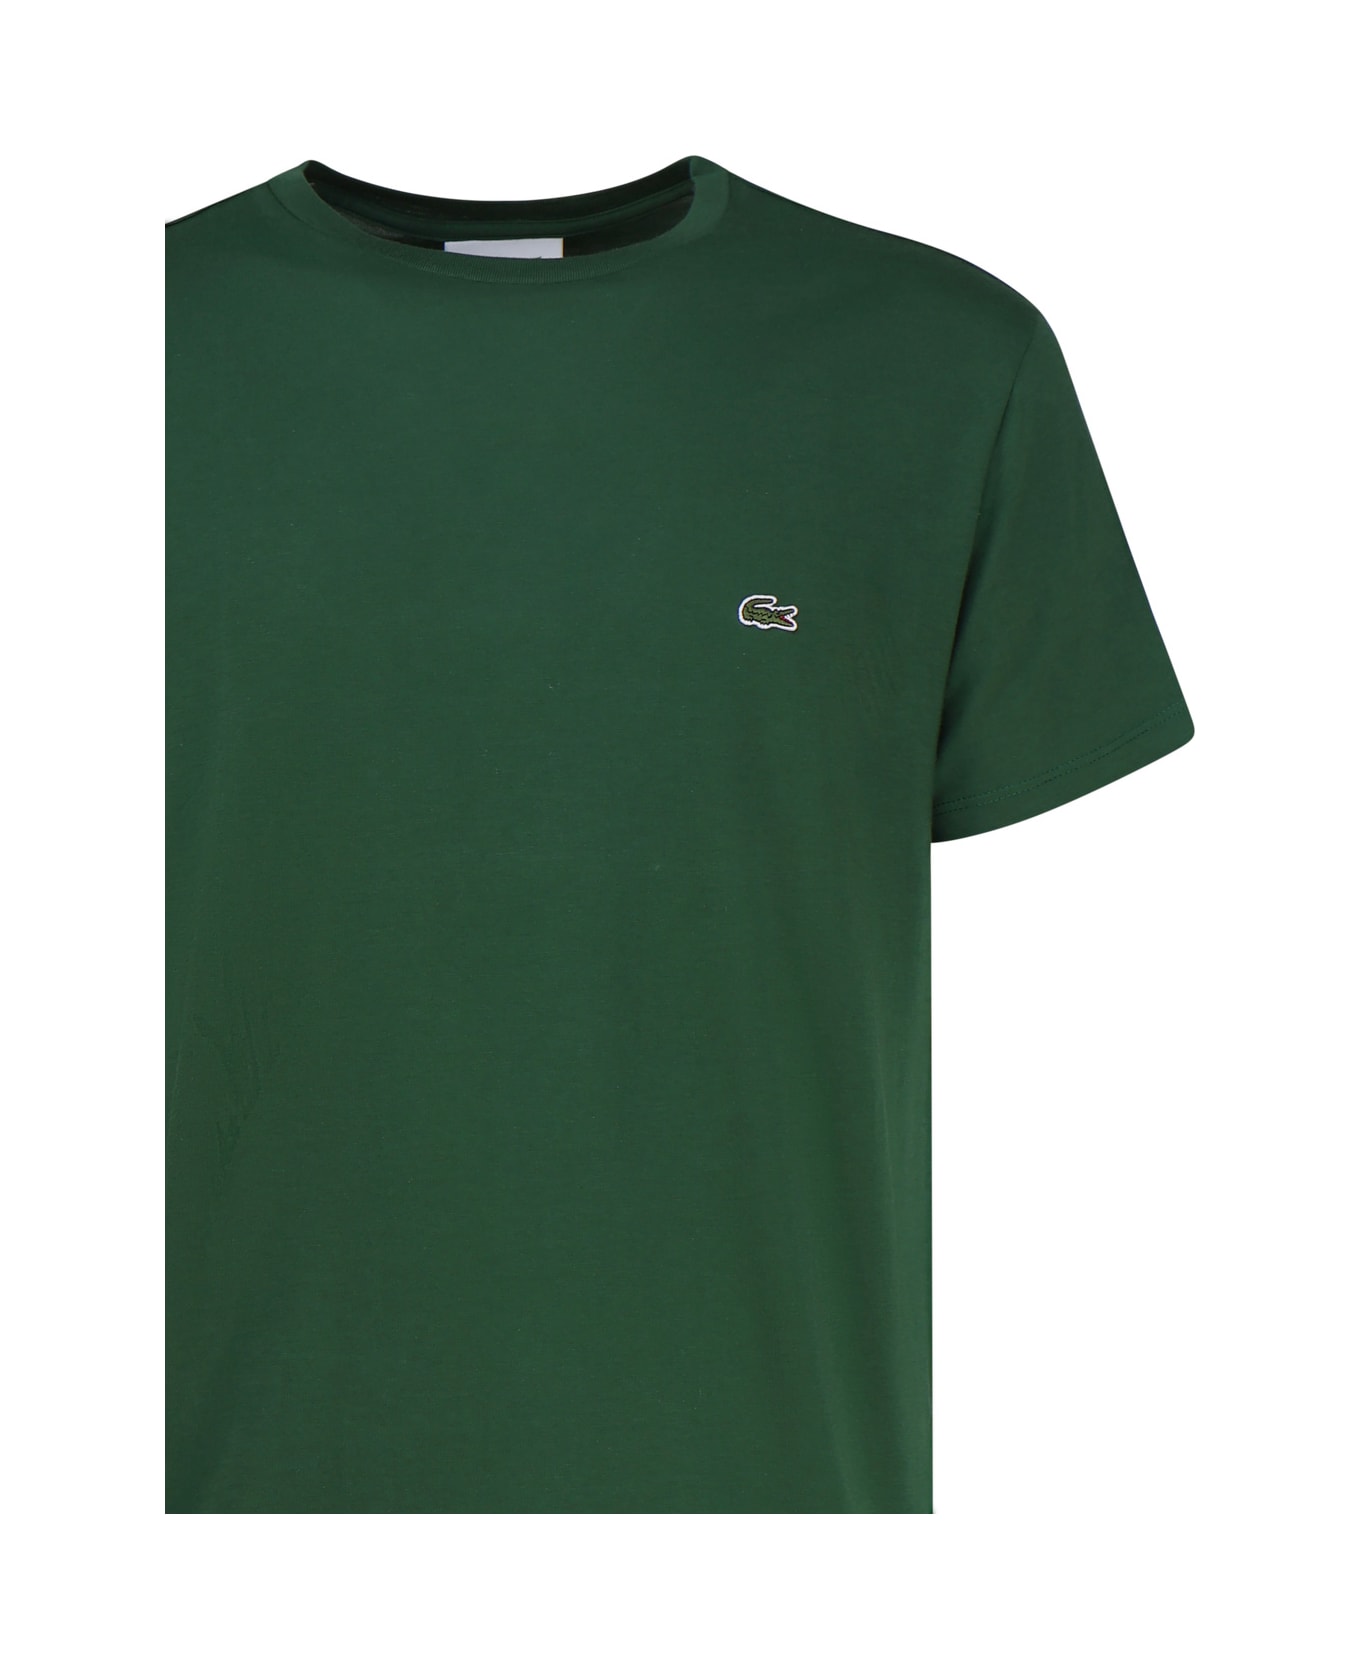 Lacoste Green T-shirt In Cotton Jersey Lacoste シャツ